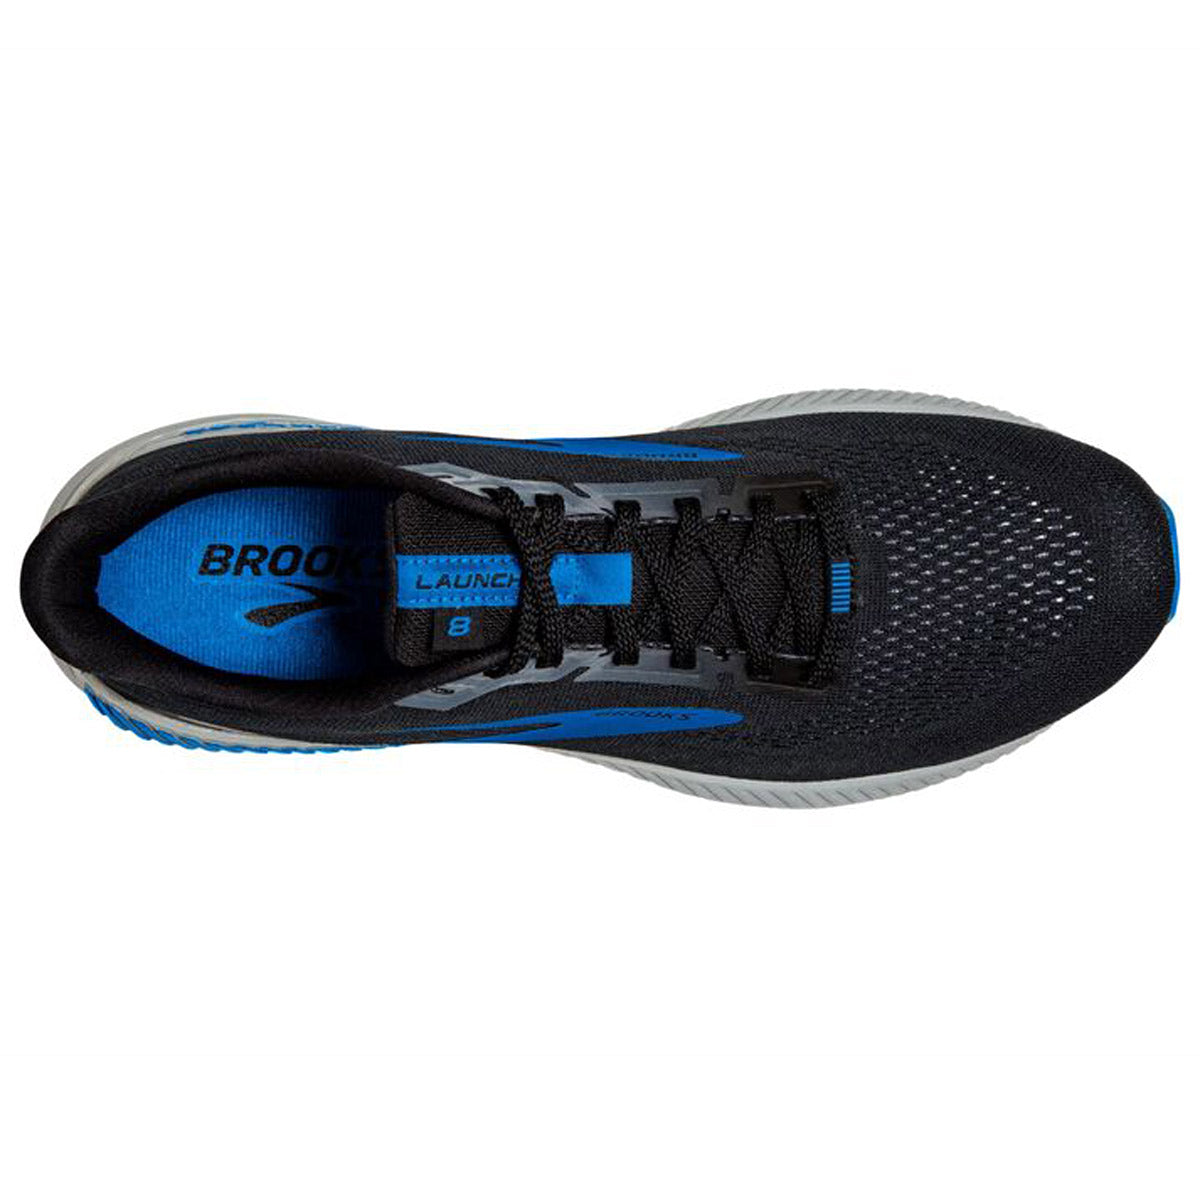 Top view of a single black and blue Brooks Launch GTS 8 running shoe with GuideRails holistic support system.